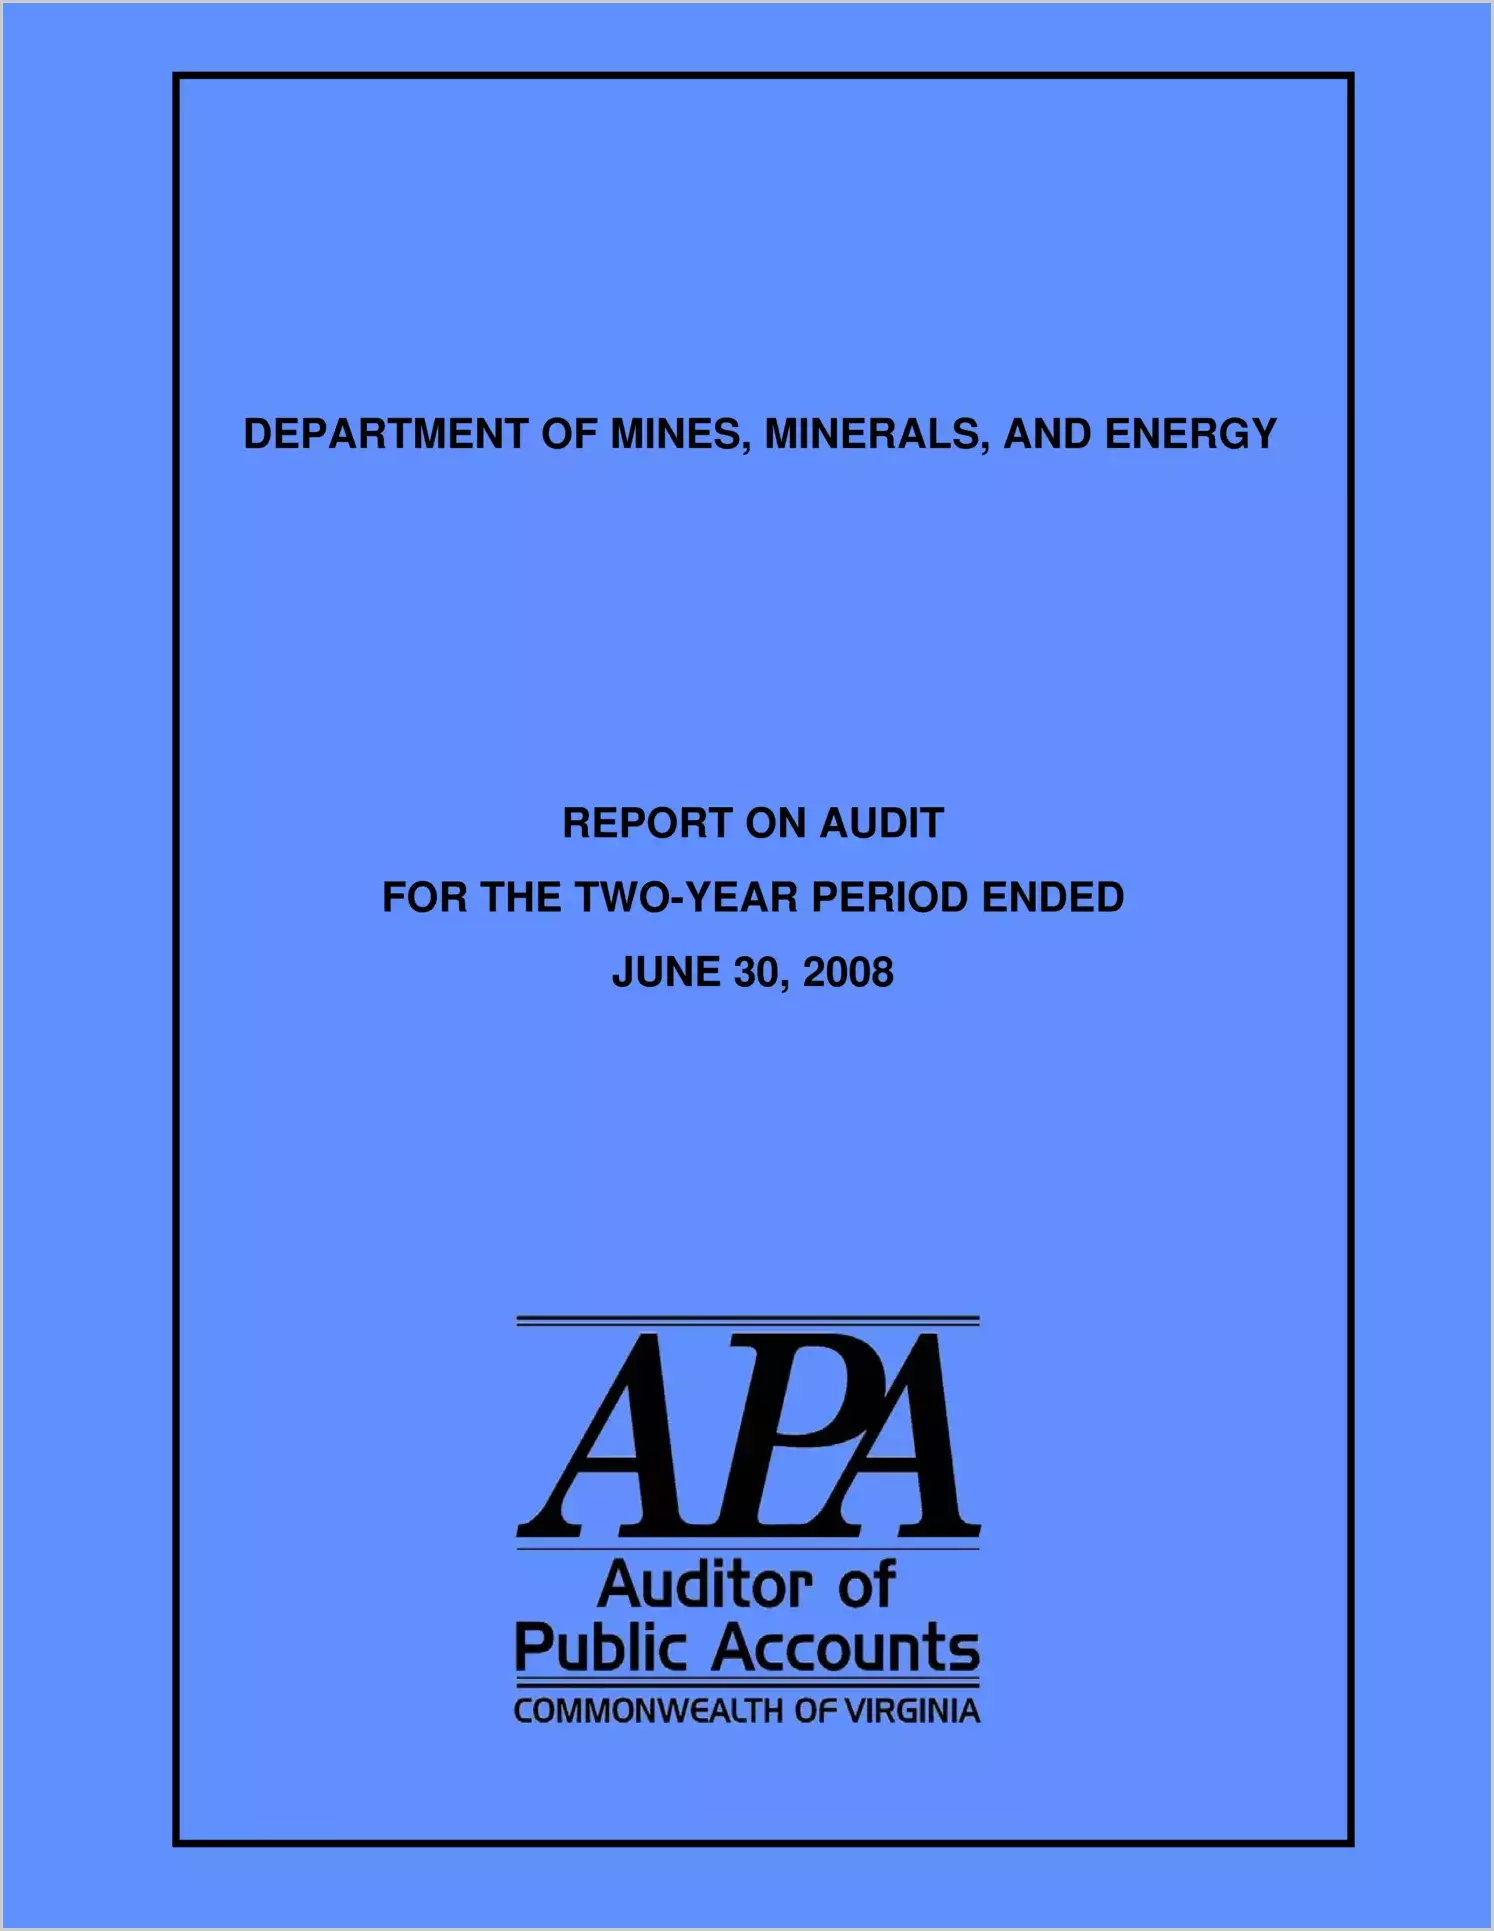 Department of Mines, Minerals, and Energy for the two-year period ended June 30, 2008